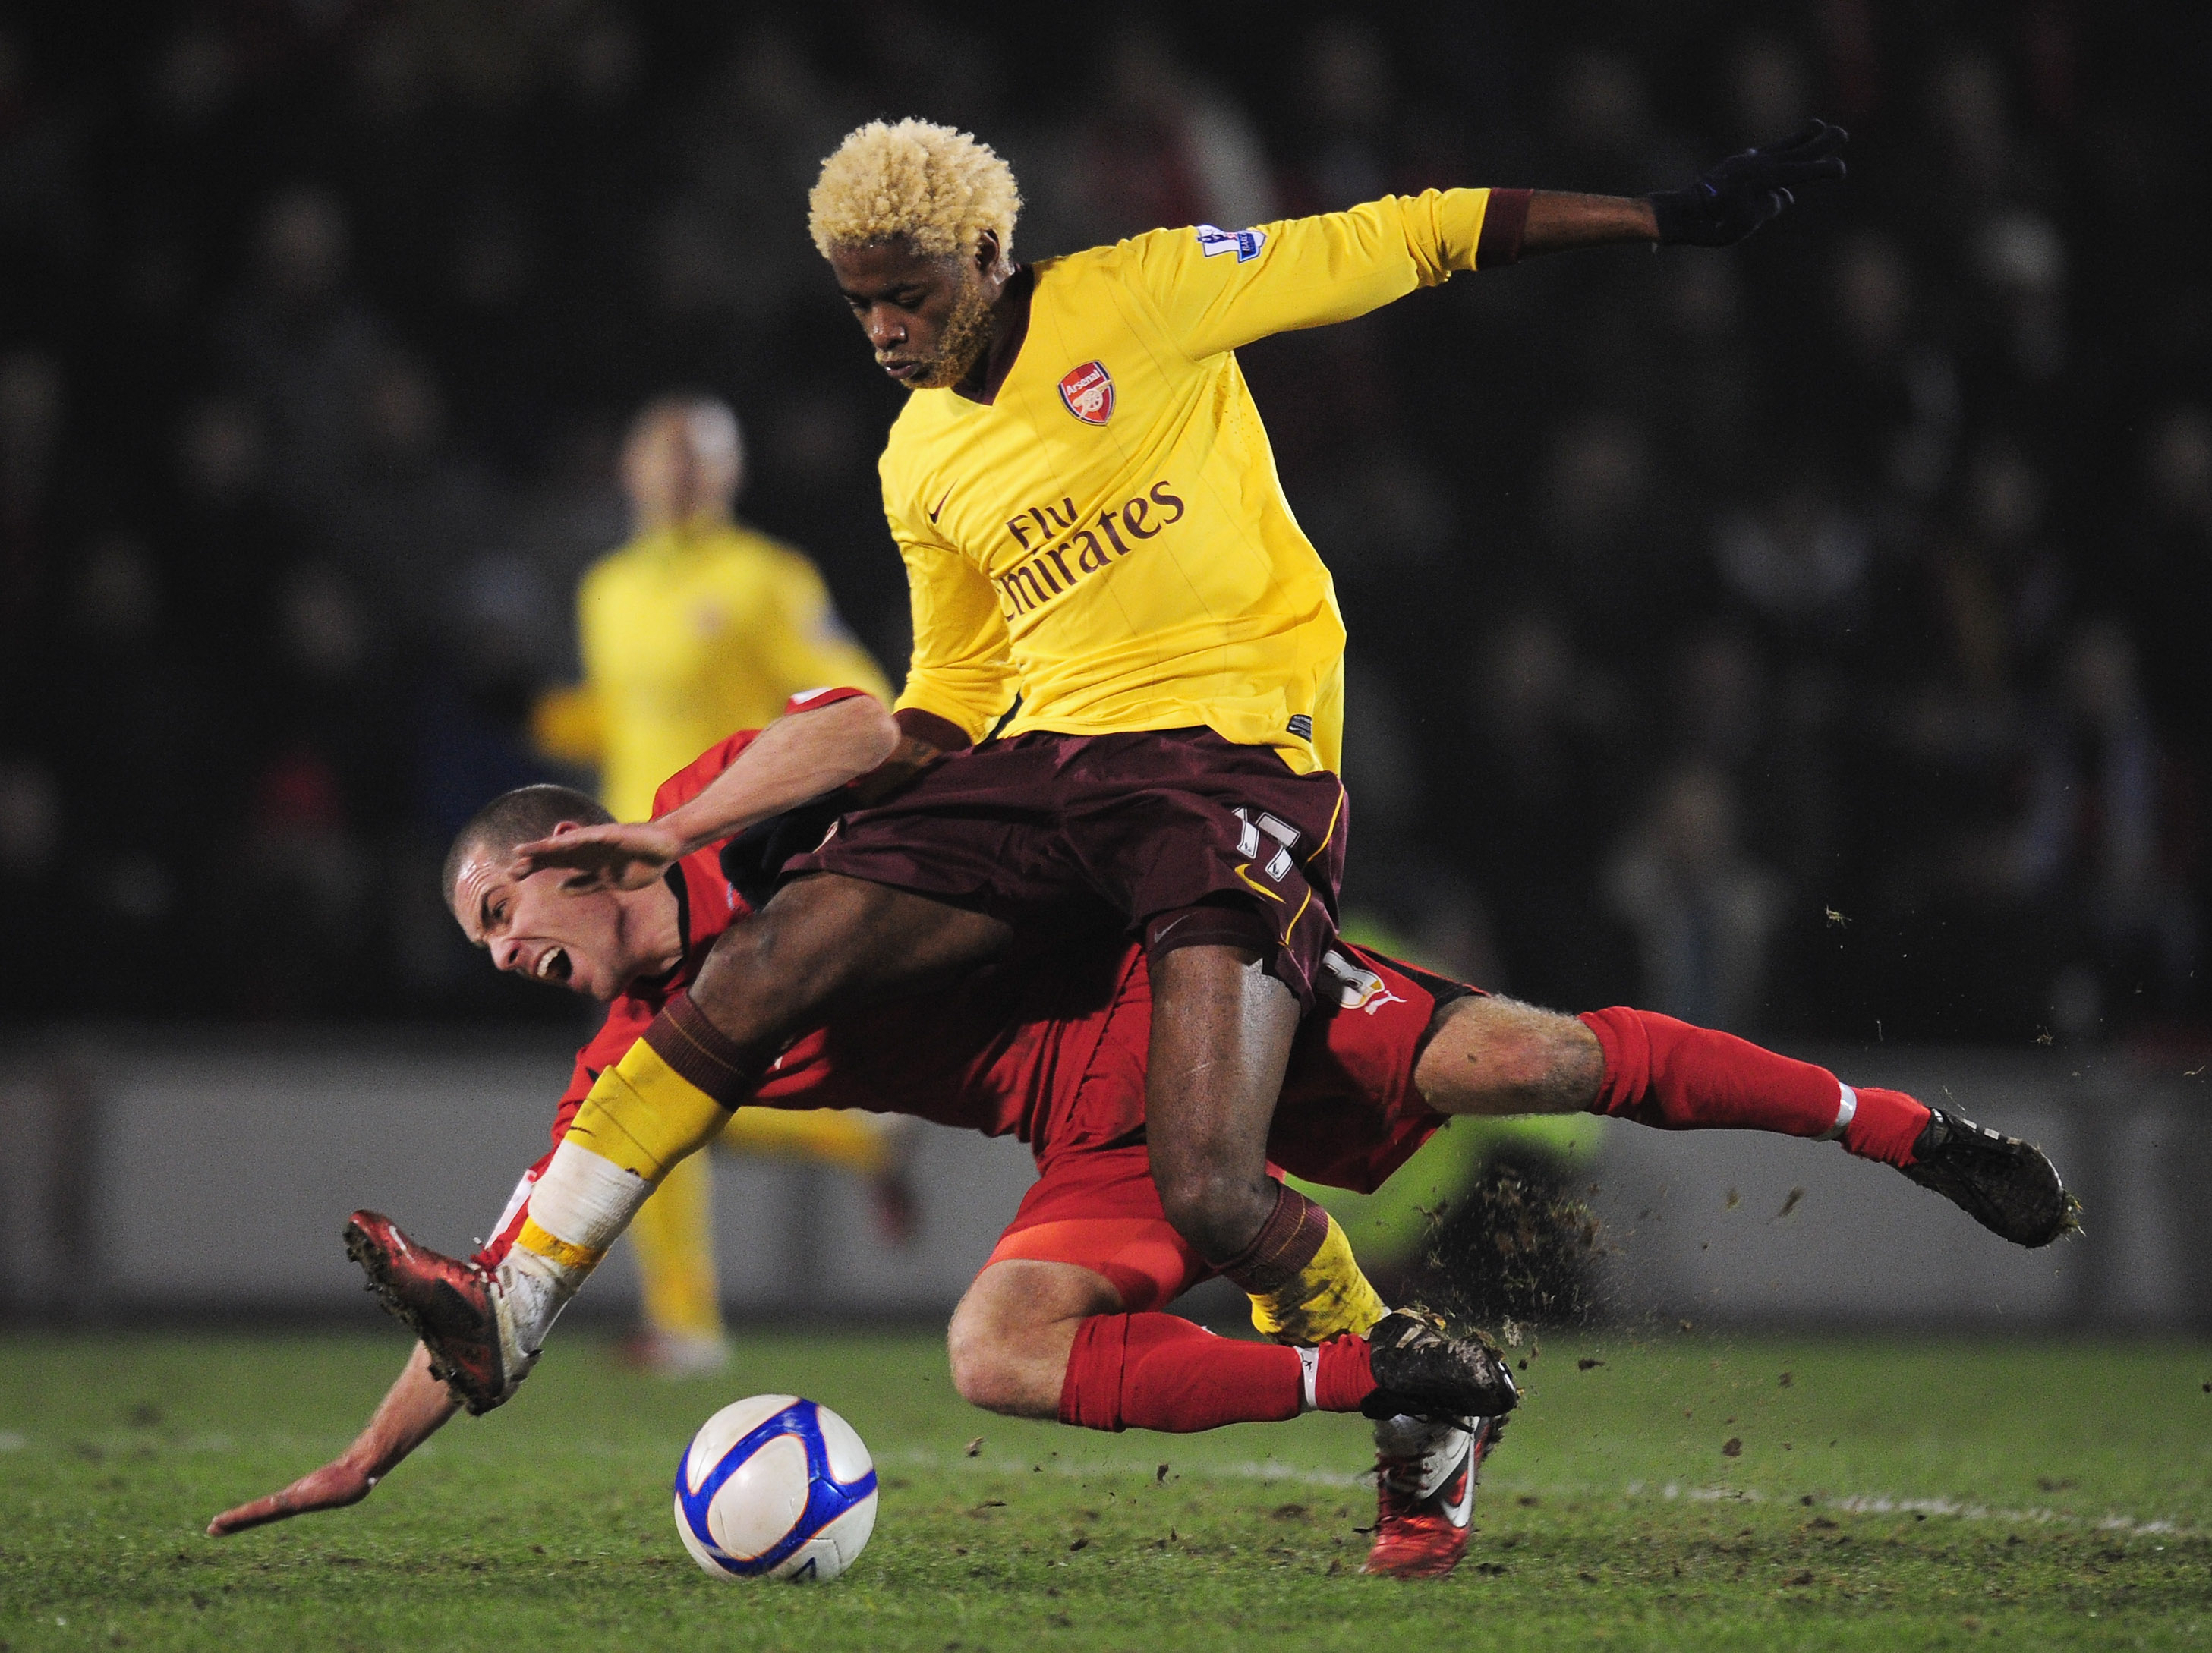 LONDON, ENGLAND - FEBRUARY 20:   Alex Song of Arsenal challenges Stephen Dawson of Leyton Orient during the FA Cup sponsored by E.ON 5th Round match between Leyton Orient and Arsenal at the Matchroom Stadium on February 20, 2011 in London, England.  (Phot